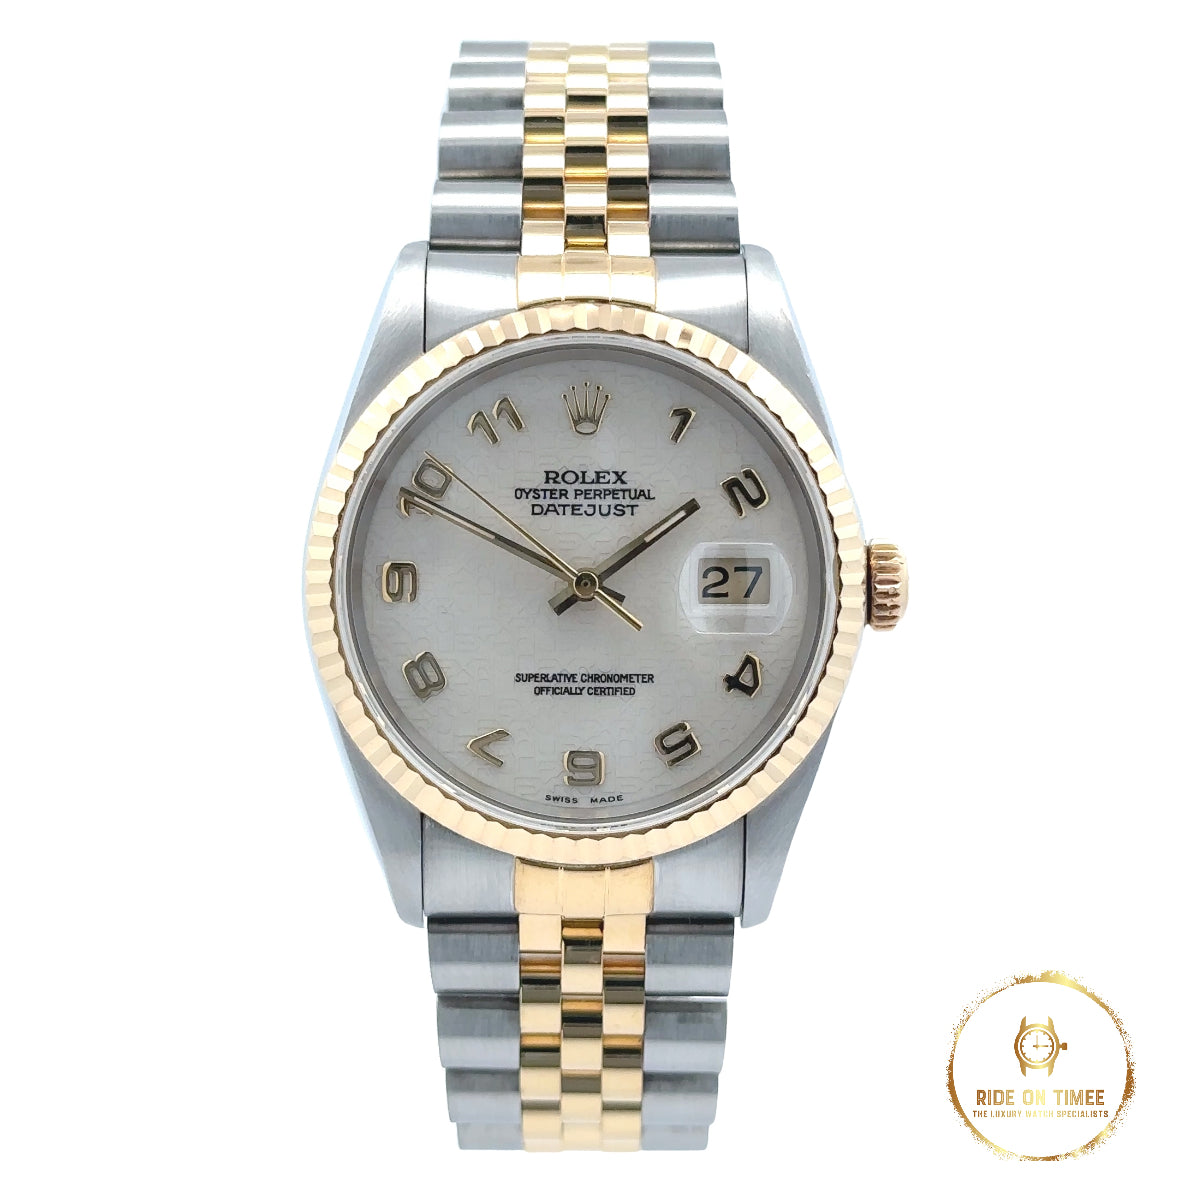 Rolex Datejust 36mm Factory Ivory Jubilee Dial ‘16233’ - Ride On Timee